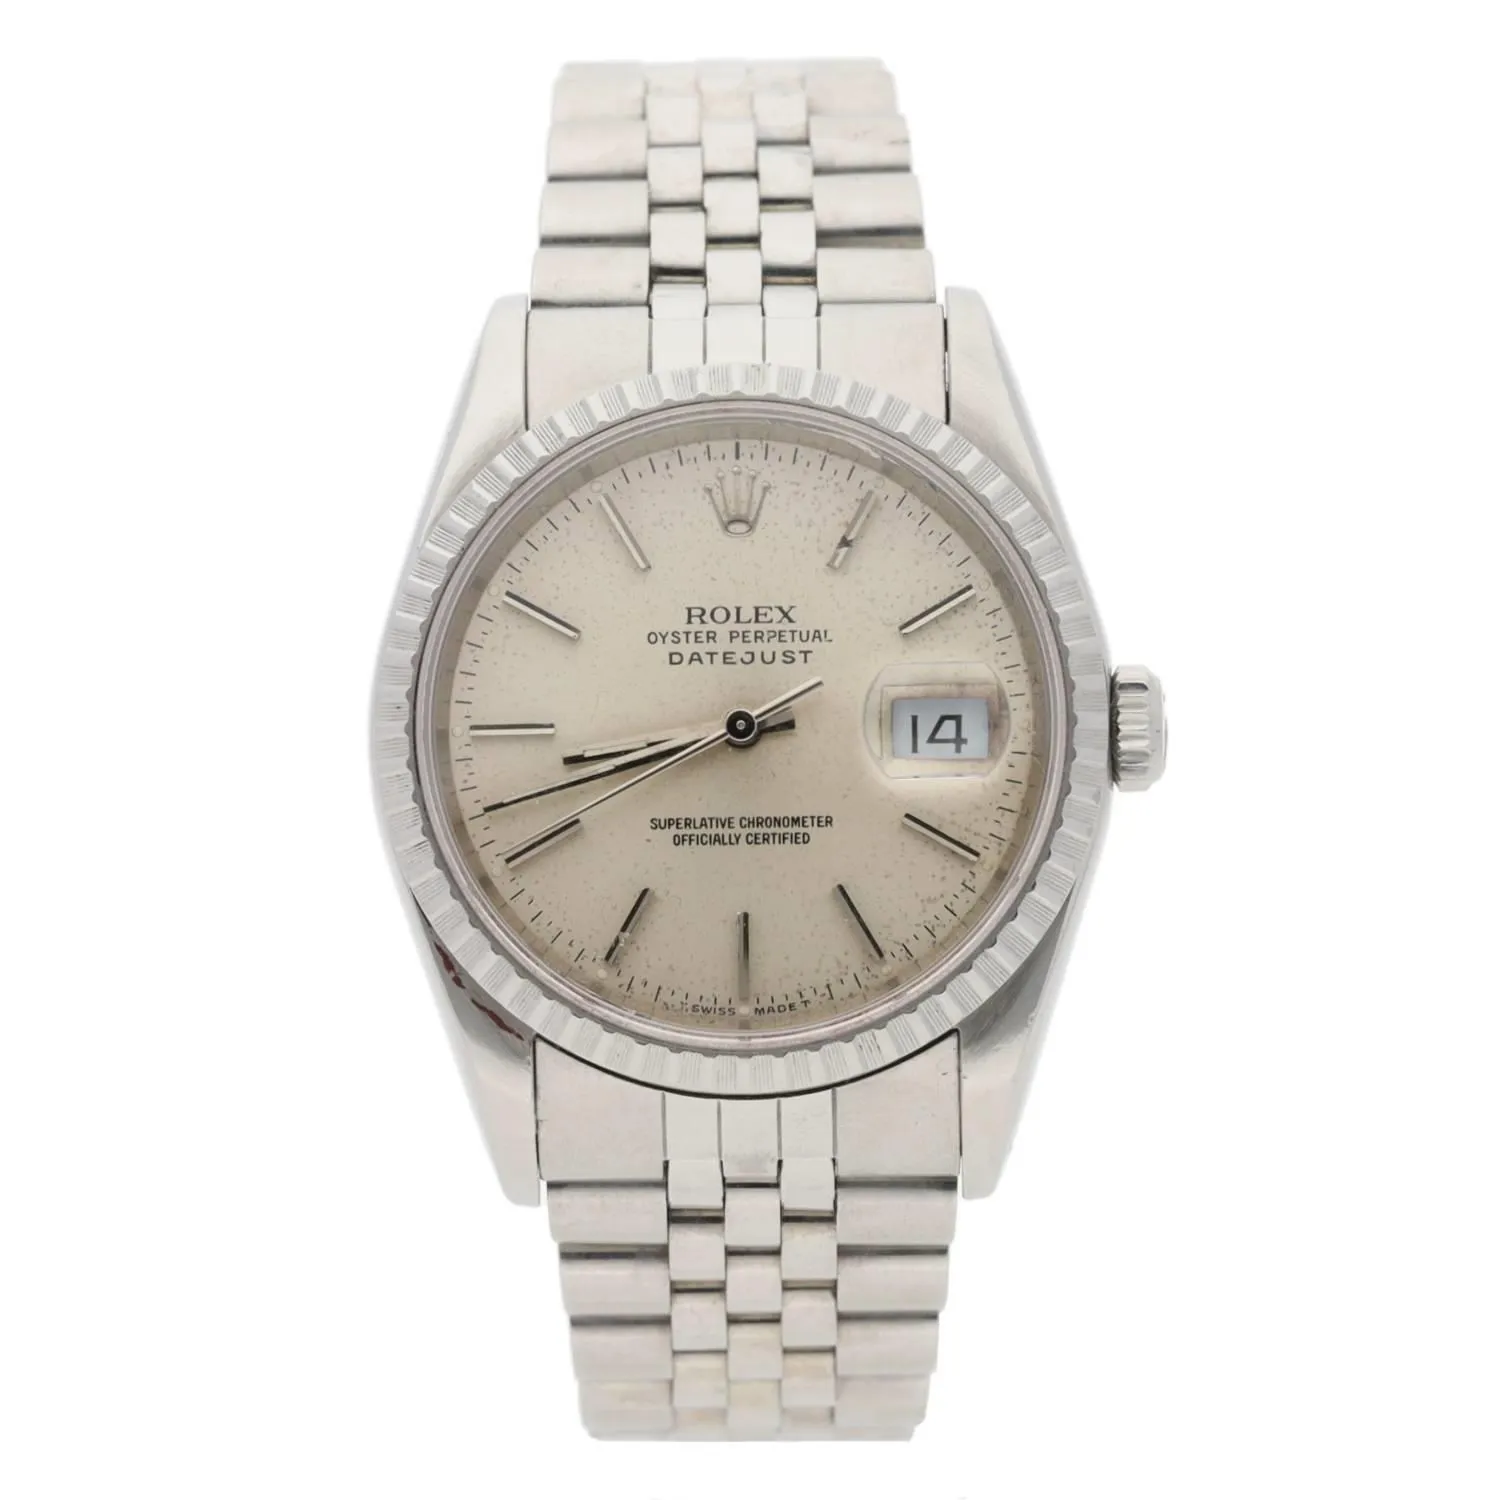 Rolex Oyster Perpetual "Datejust" 16220 36mm Stainless steel Silver